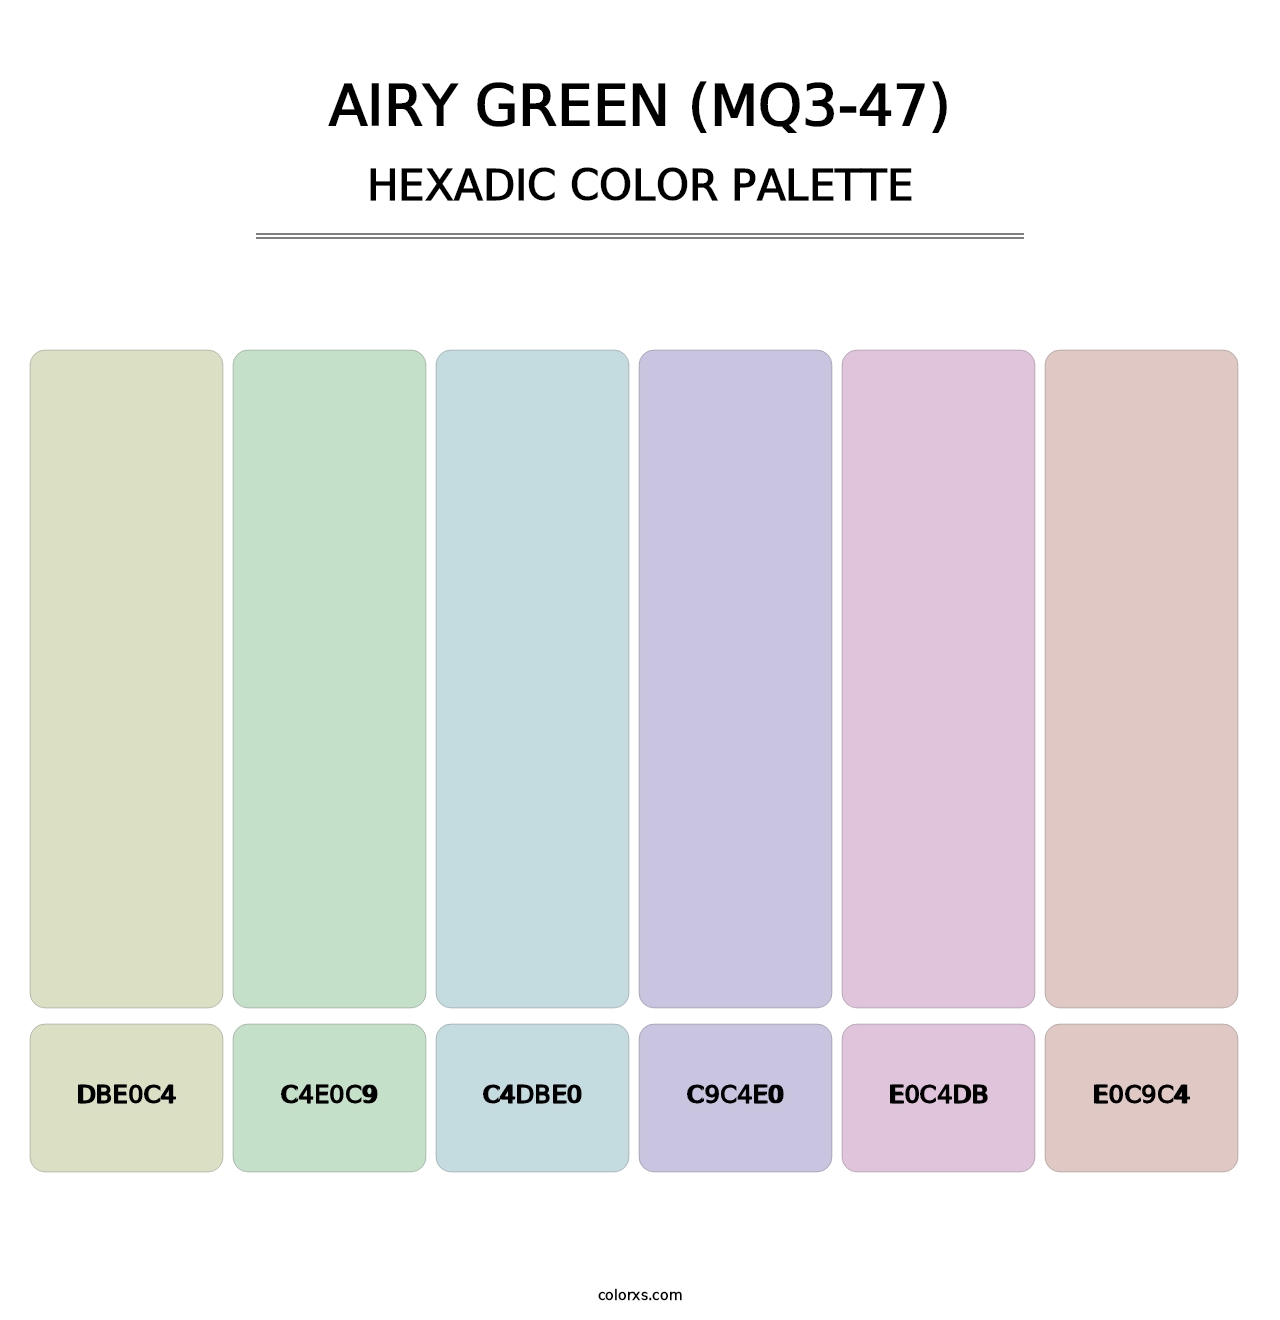 Airy Green (MQ3-47) - Hexadic Color Palette